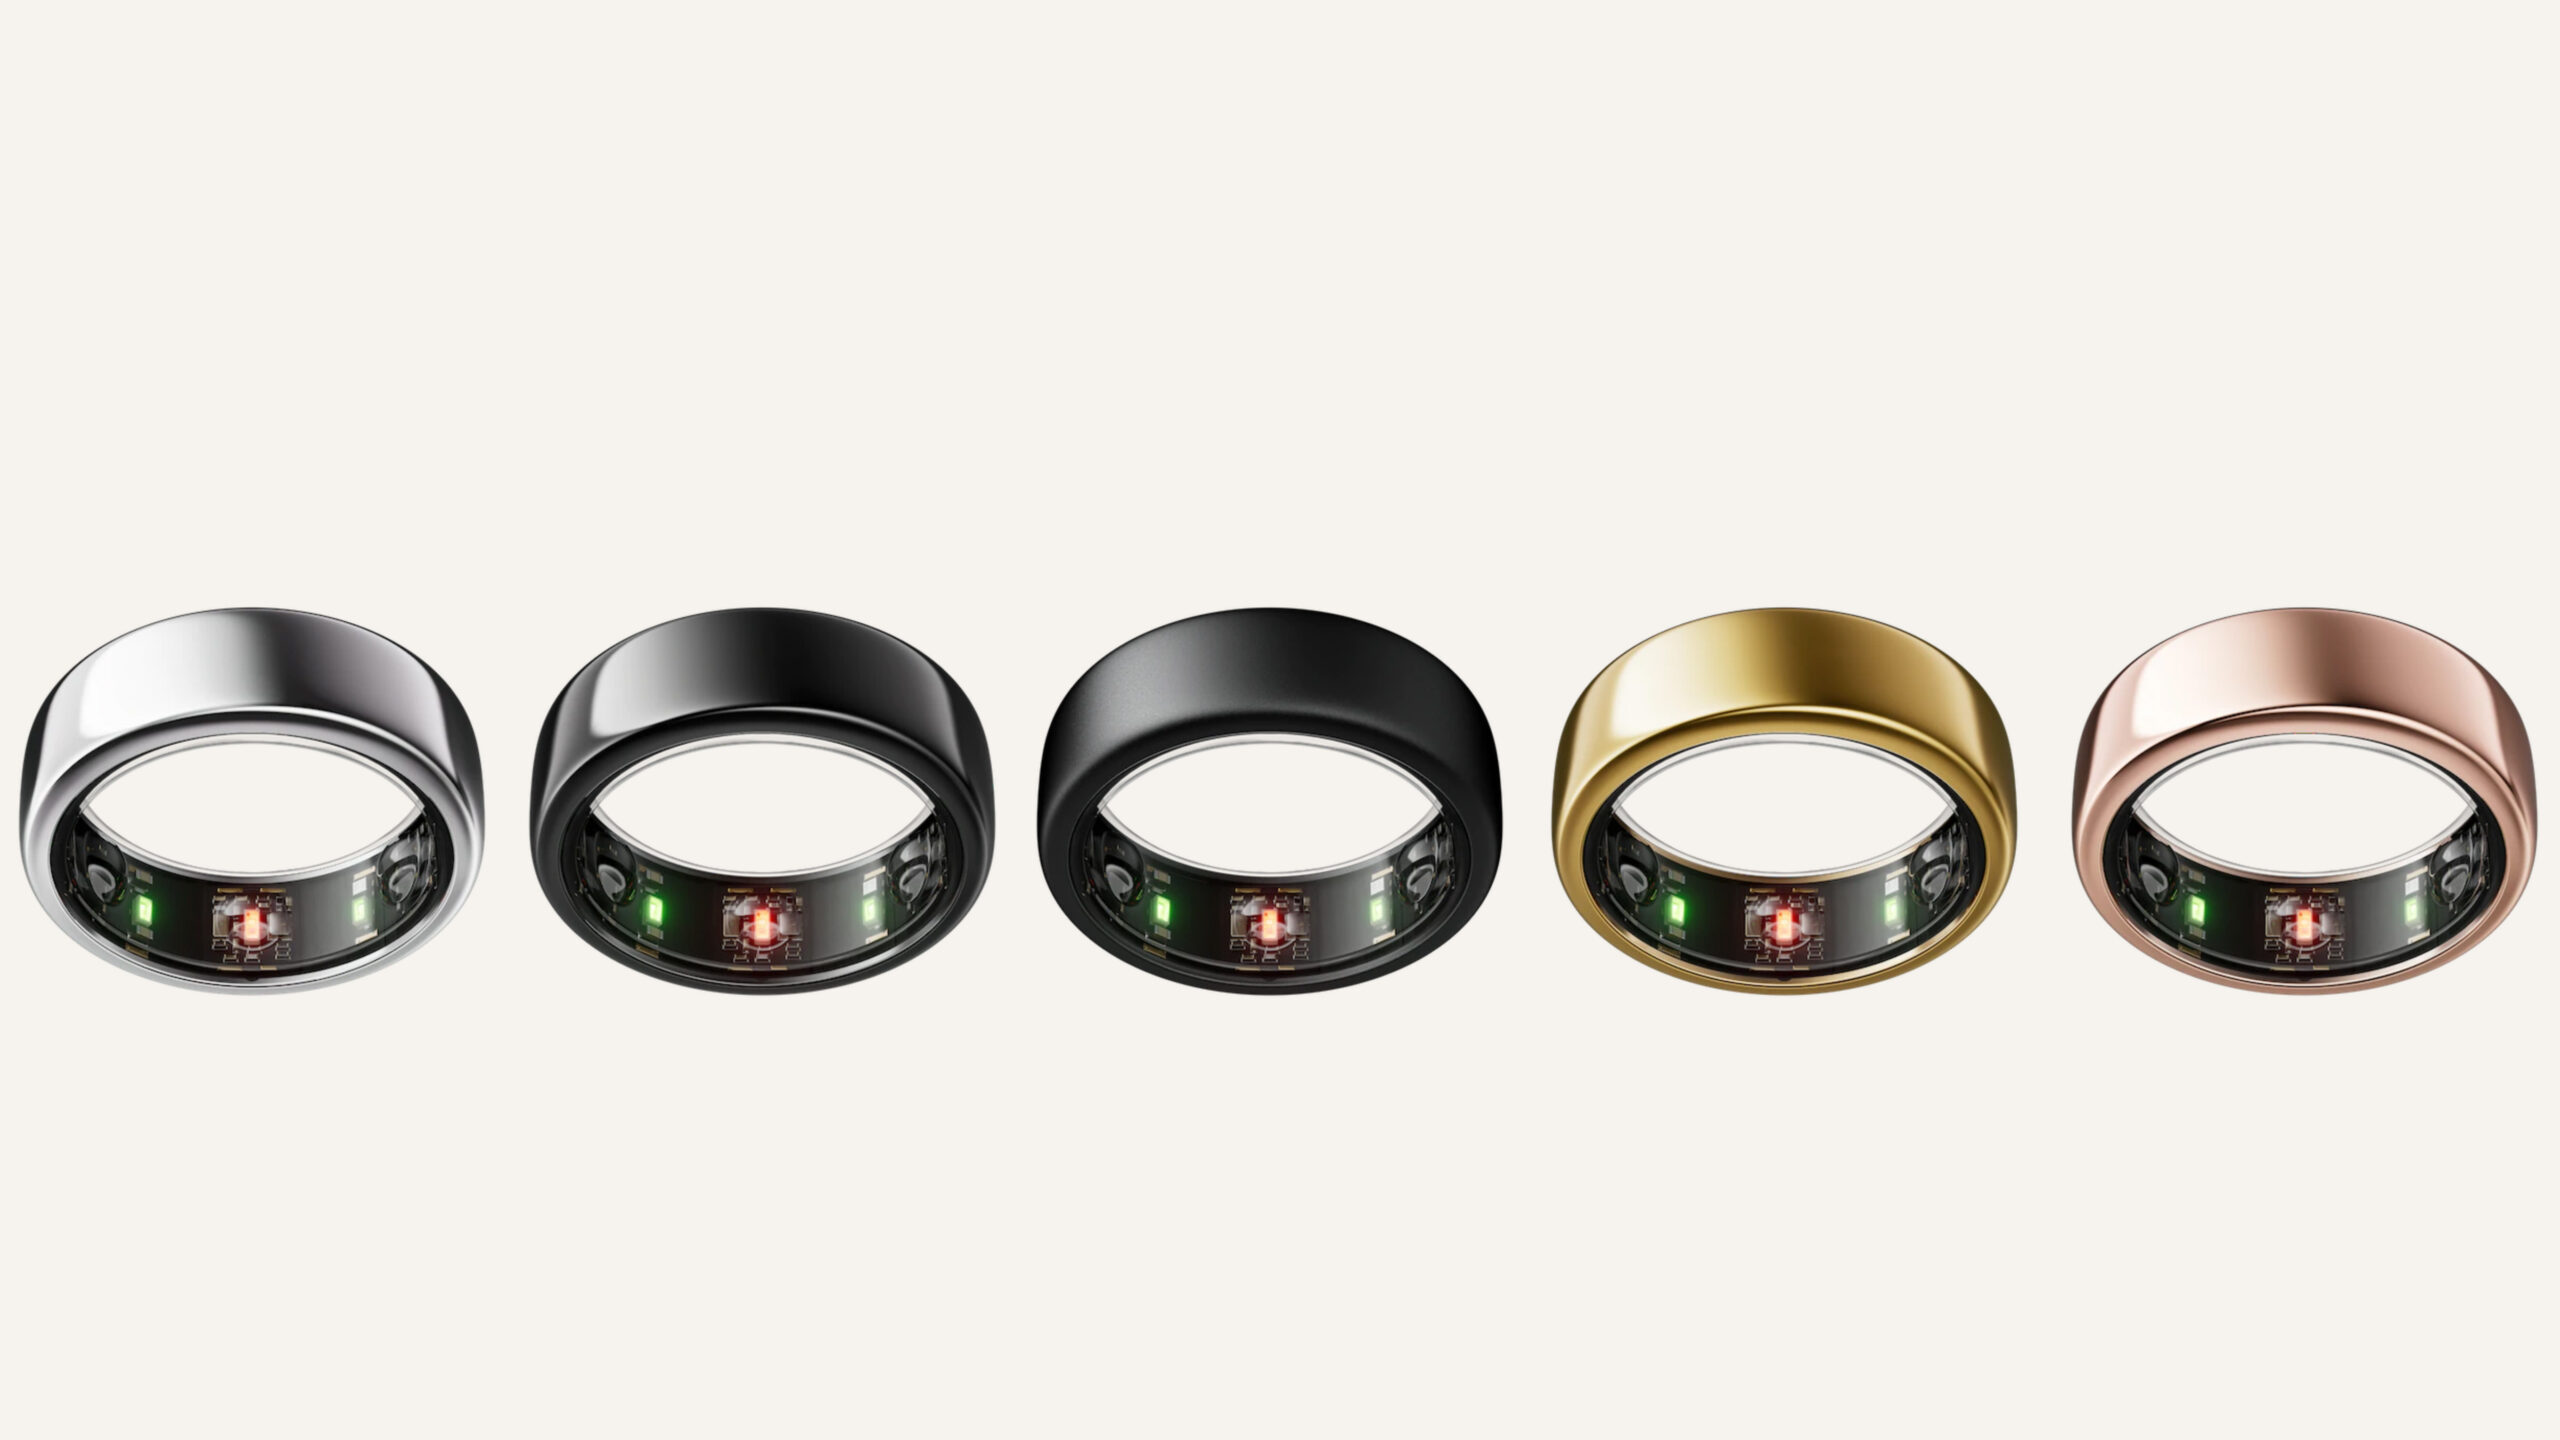 The Oura Ring 3 Horizon is available in silver, black, stealth, gold, and rose gold.